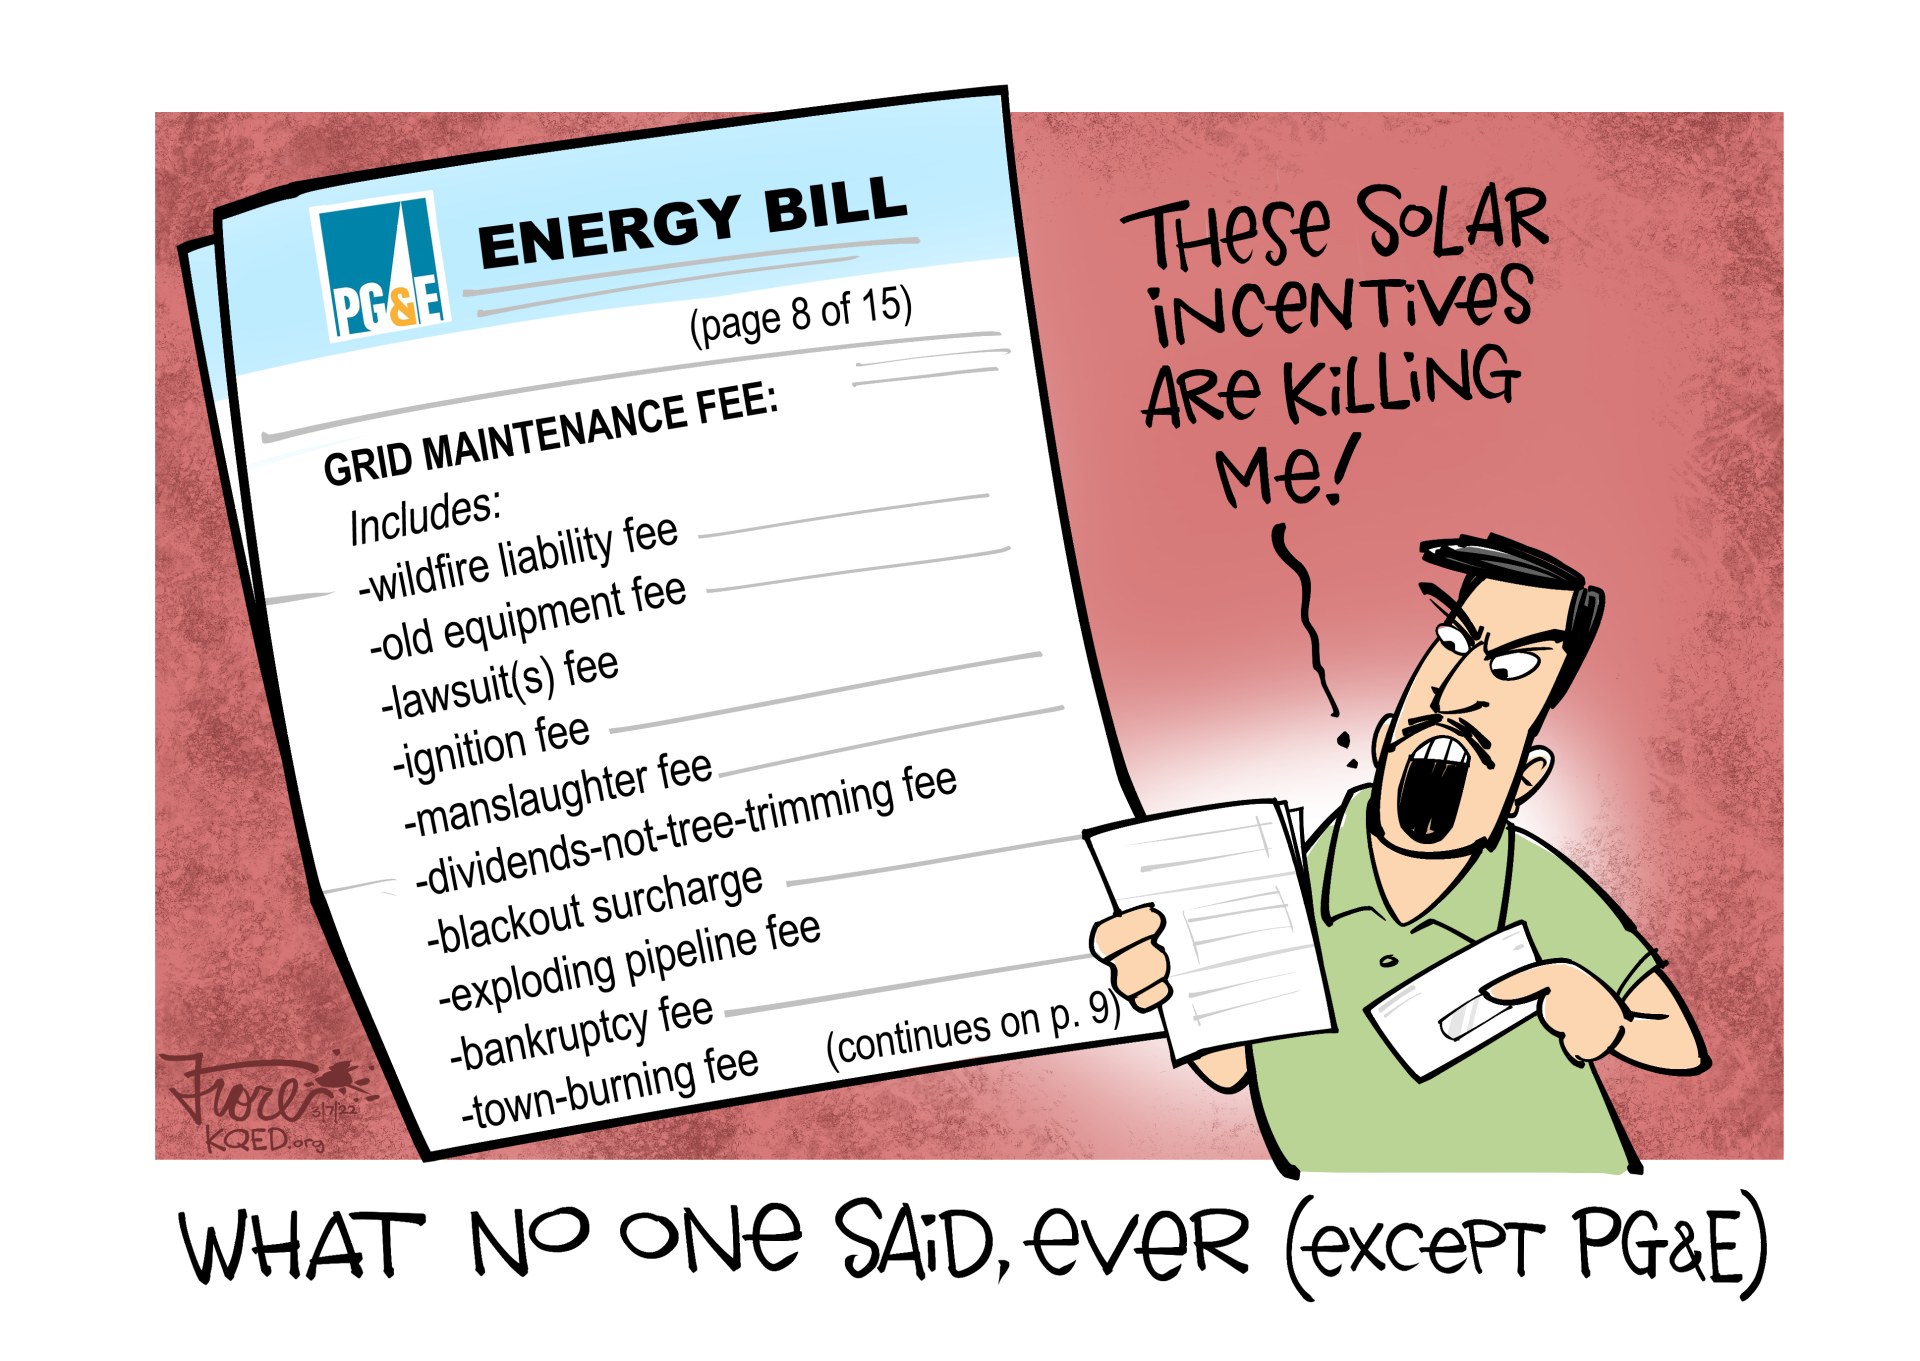 Cartoon: an angry man holding a PG&E bill with fees like, "wildfire liability fee and town-burning fee" yells, "these solar incentives are killing me!" The caption reads, "what no one said, ever (except PG&E)"